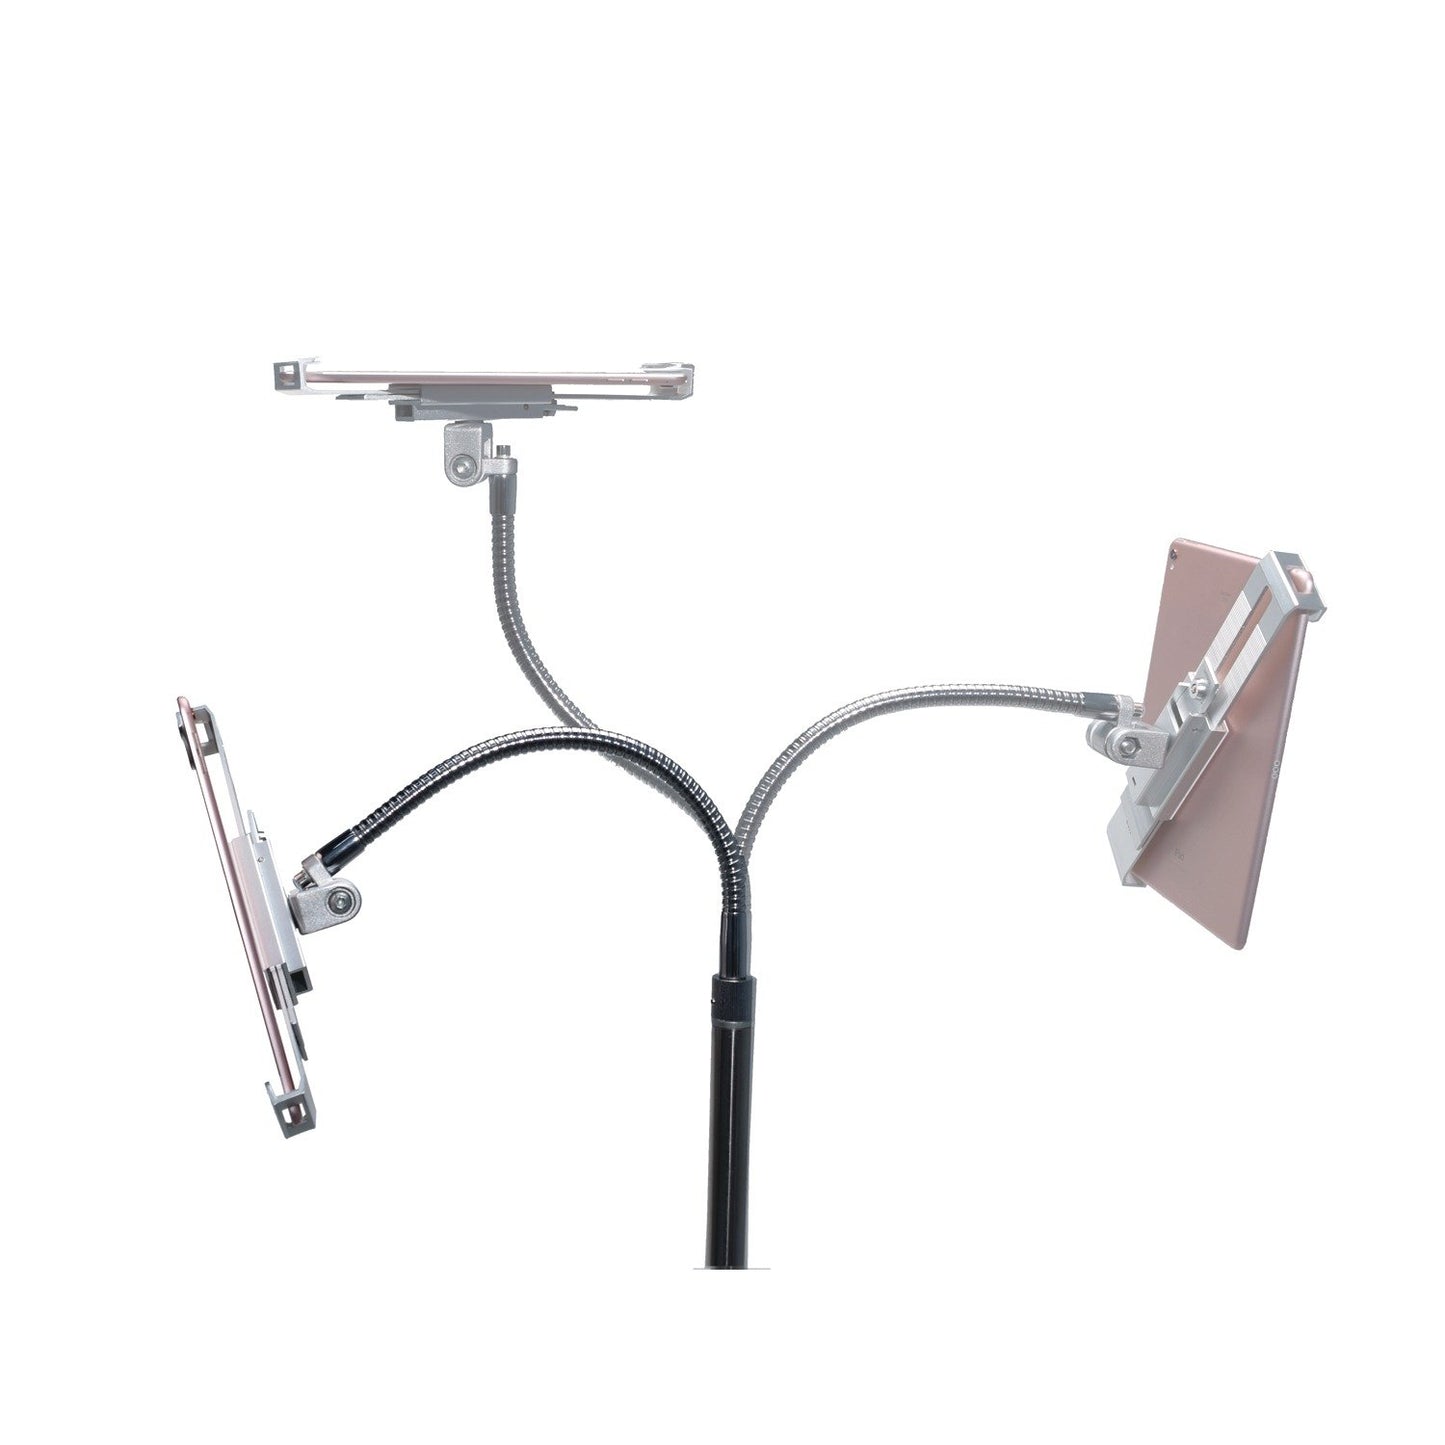 Cta Digital PADSCGS Compact Security Floor Stand w/Lock & Key for iPad®/Tablet